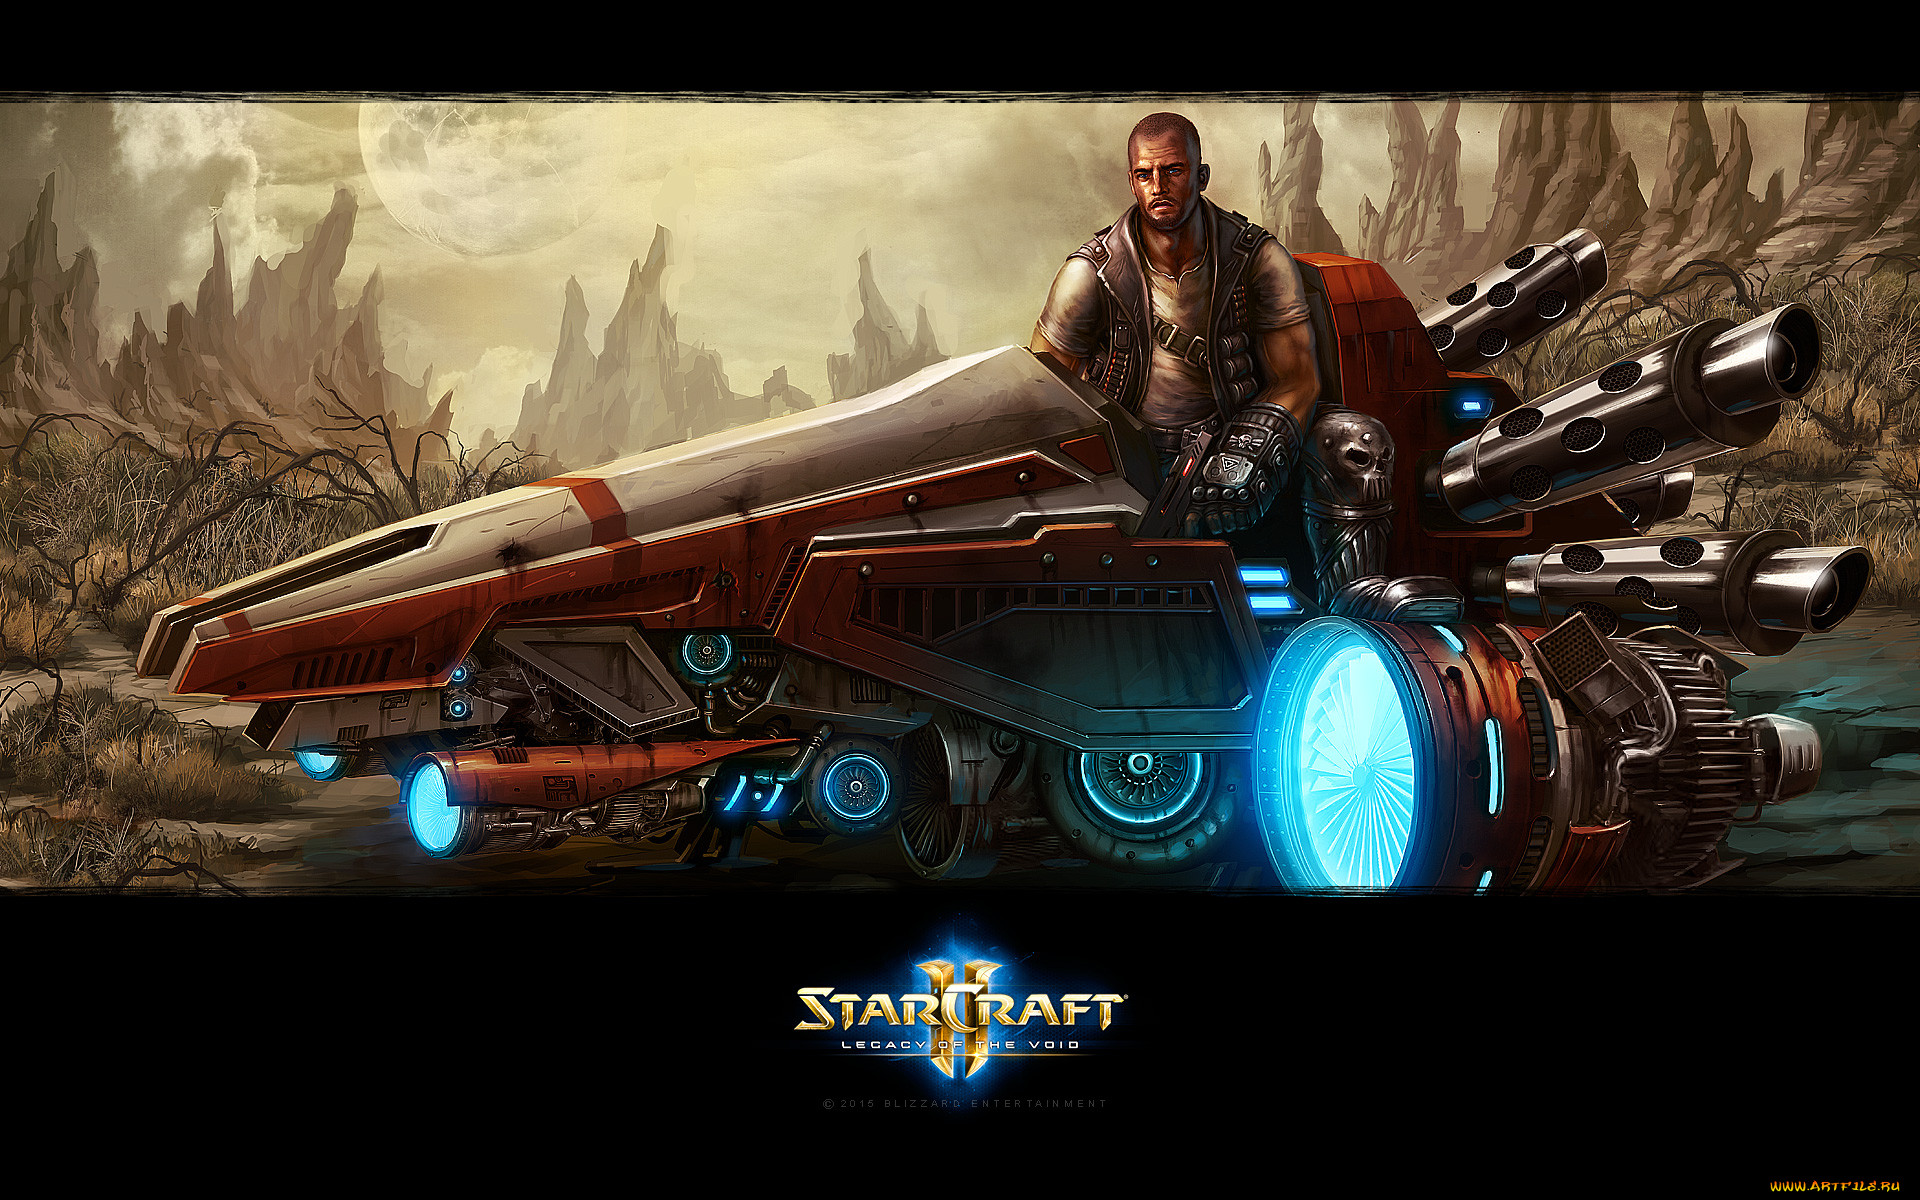  , starcraft ii,  legacy of void, , legacy, of, void, action, starcraft, ii